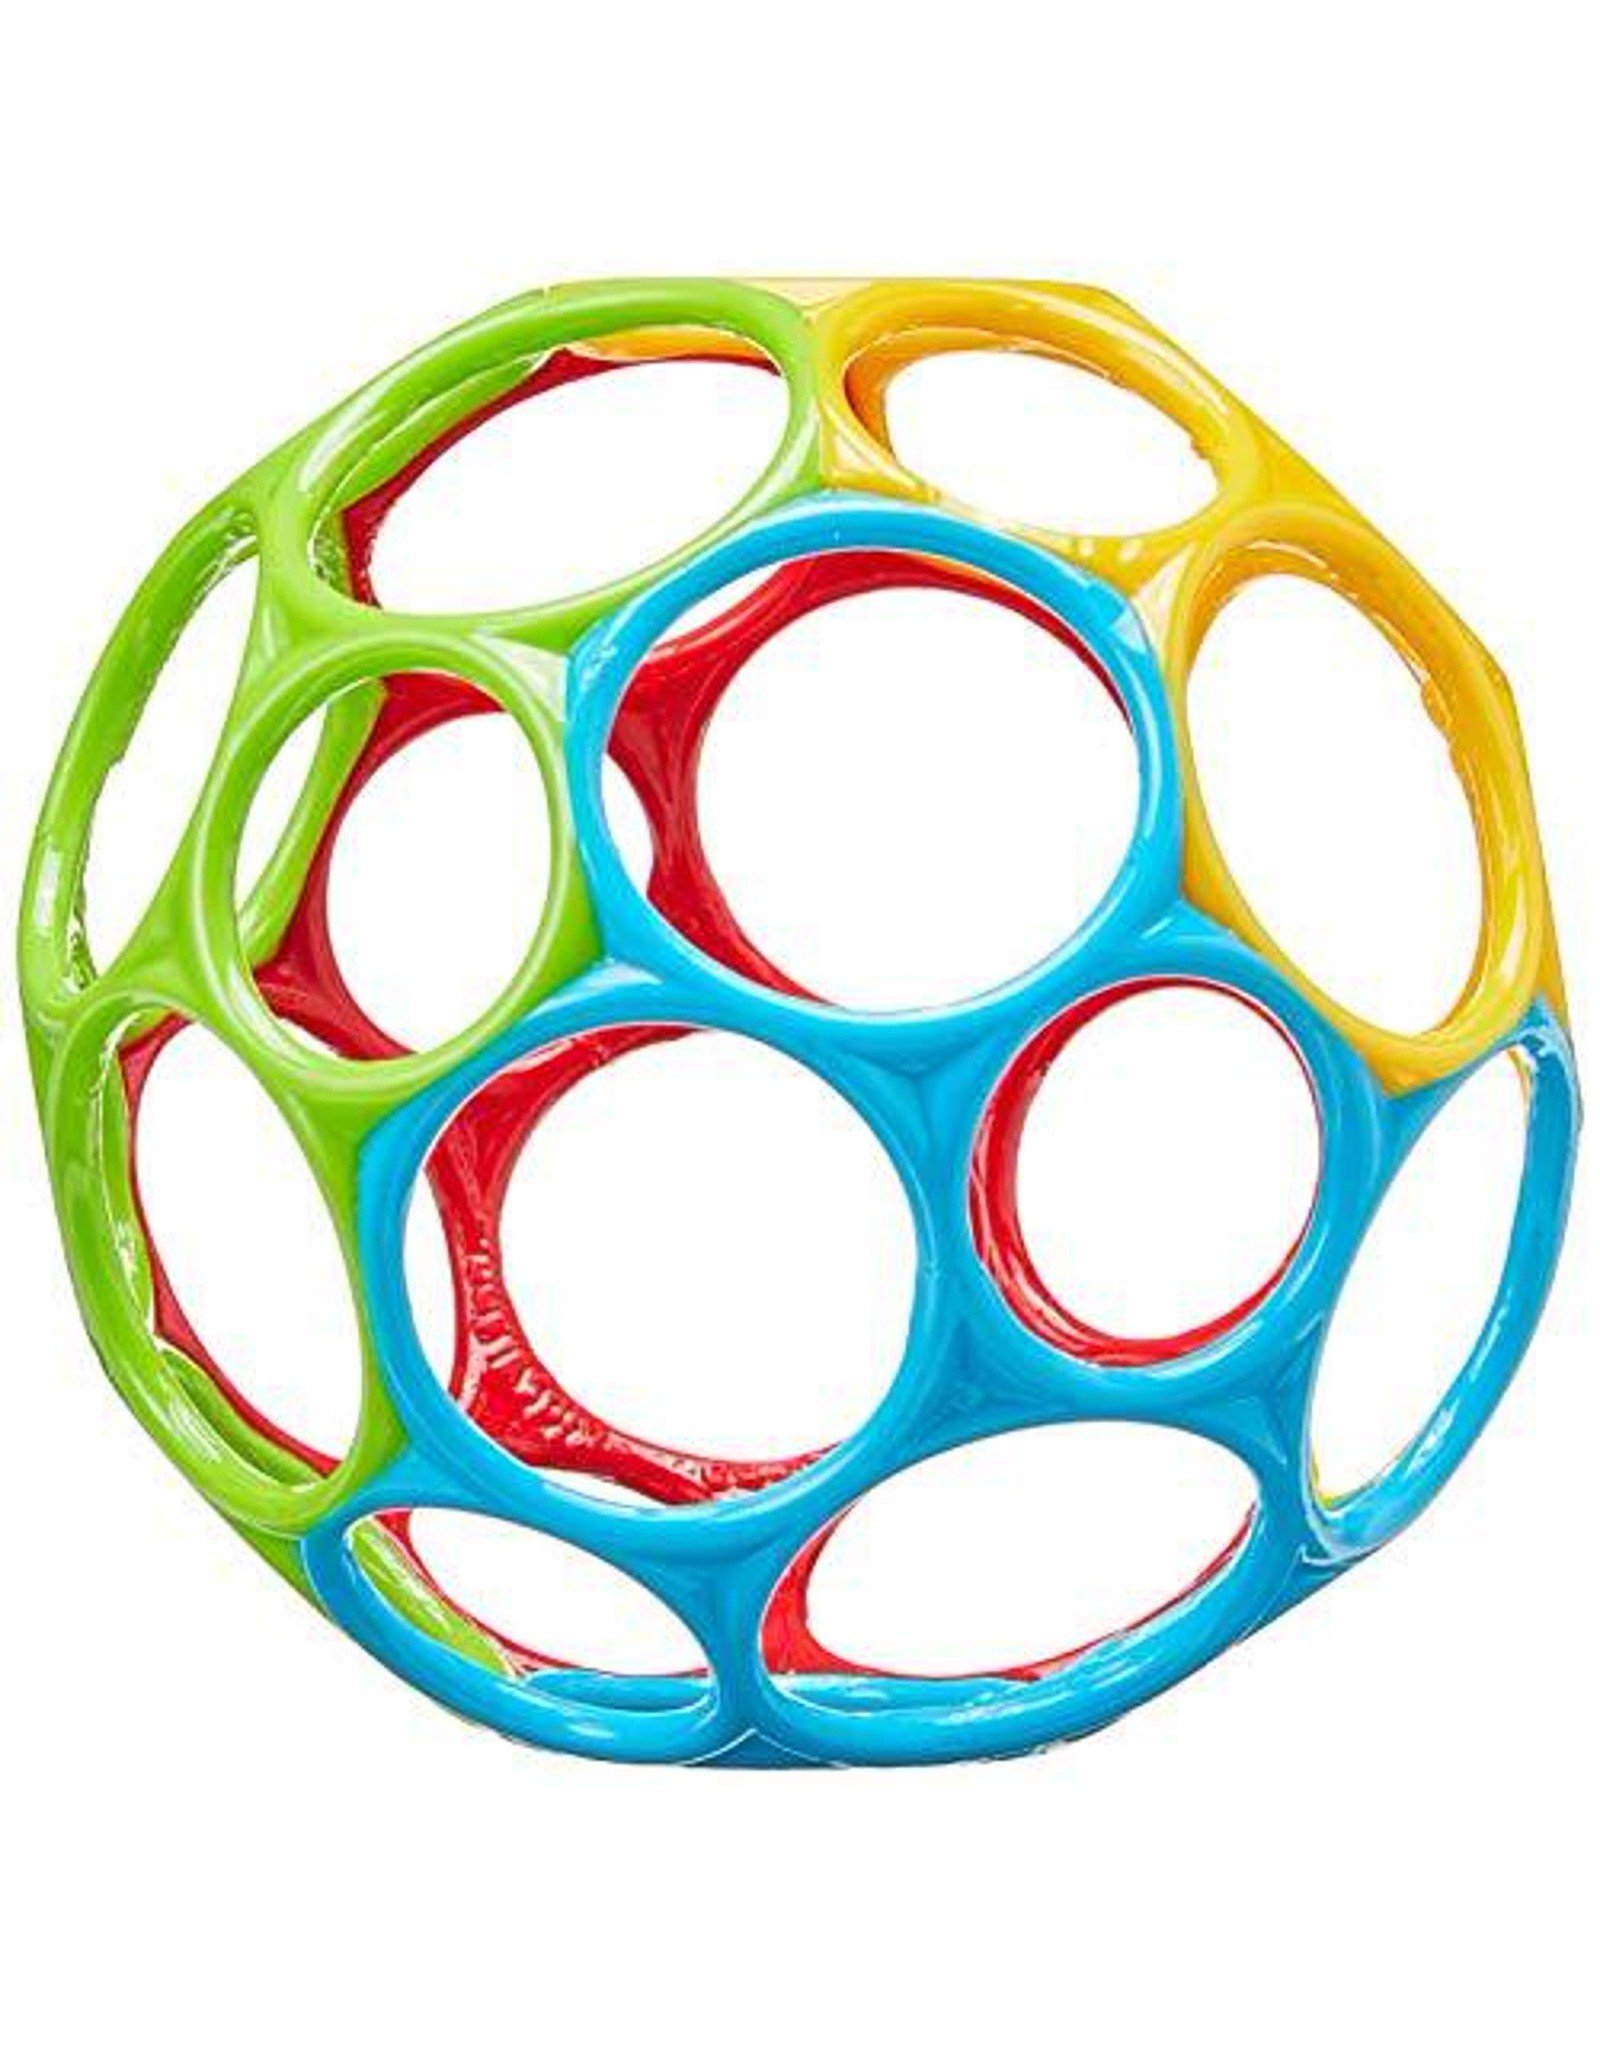 4" Oball - Red/Blue/Green/Yellow